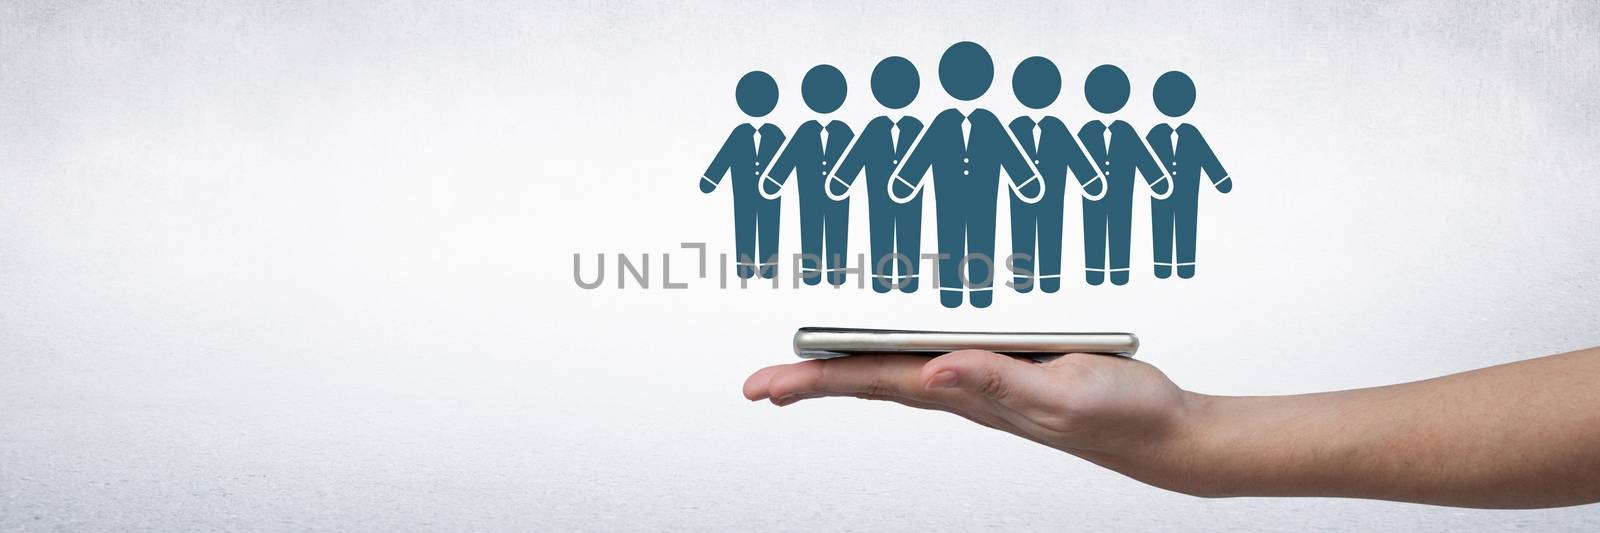 Digital composite of Hand holding tablet with business people group icon